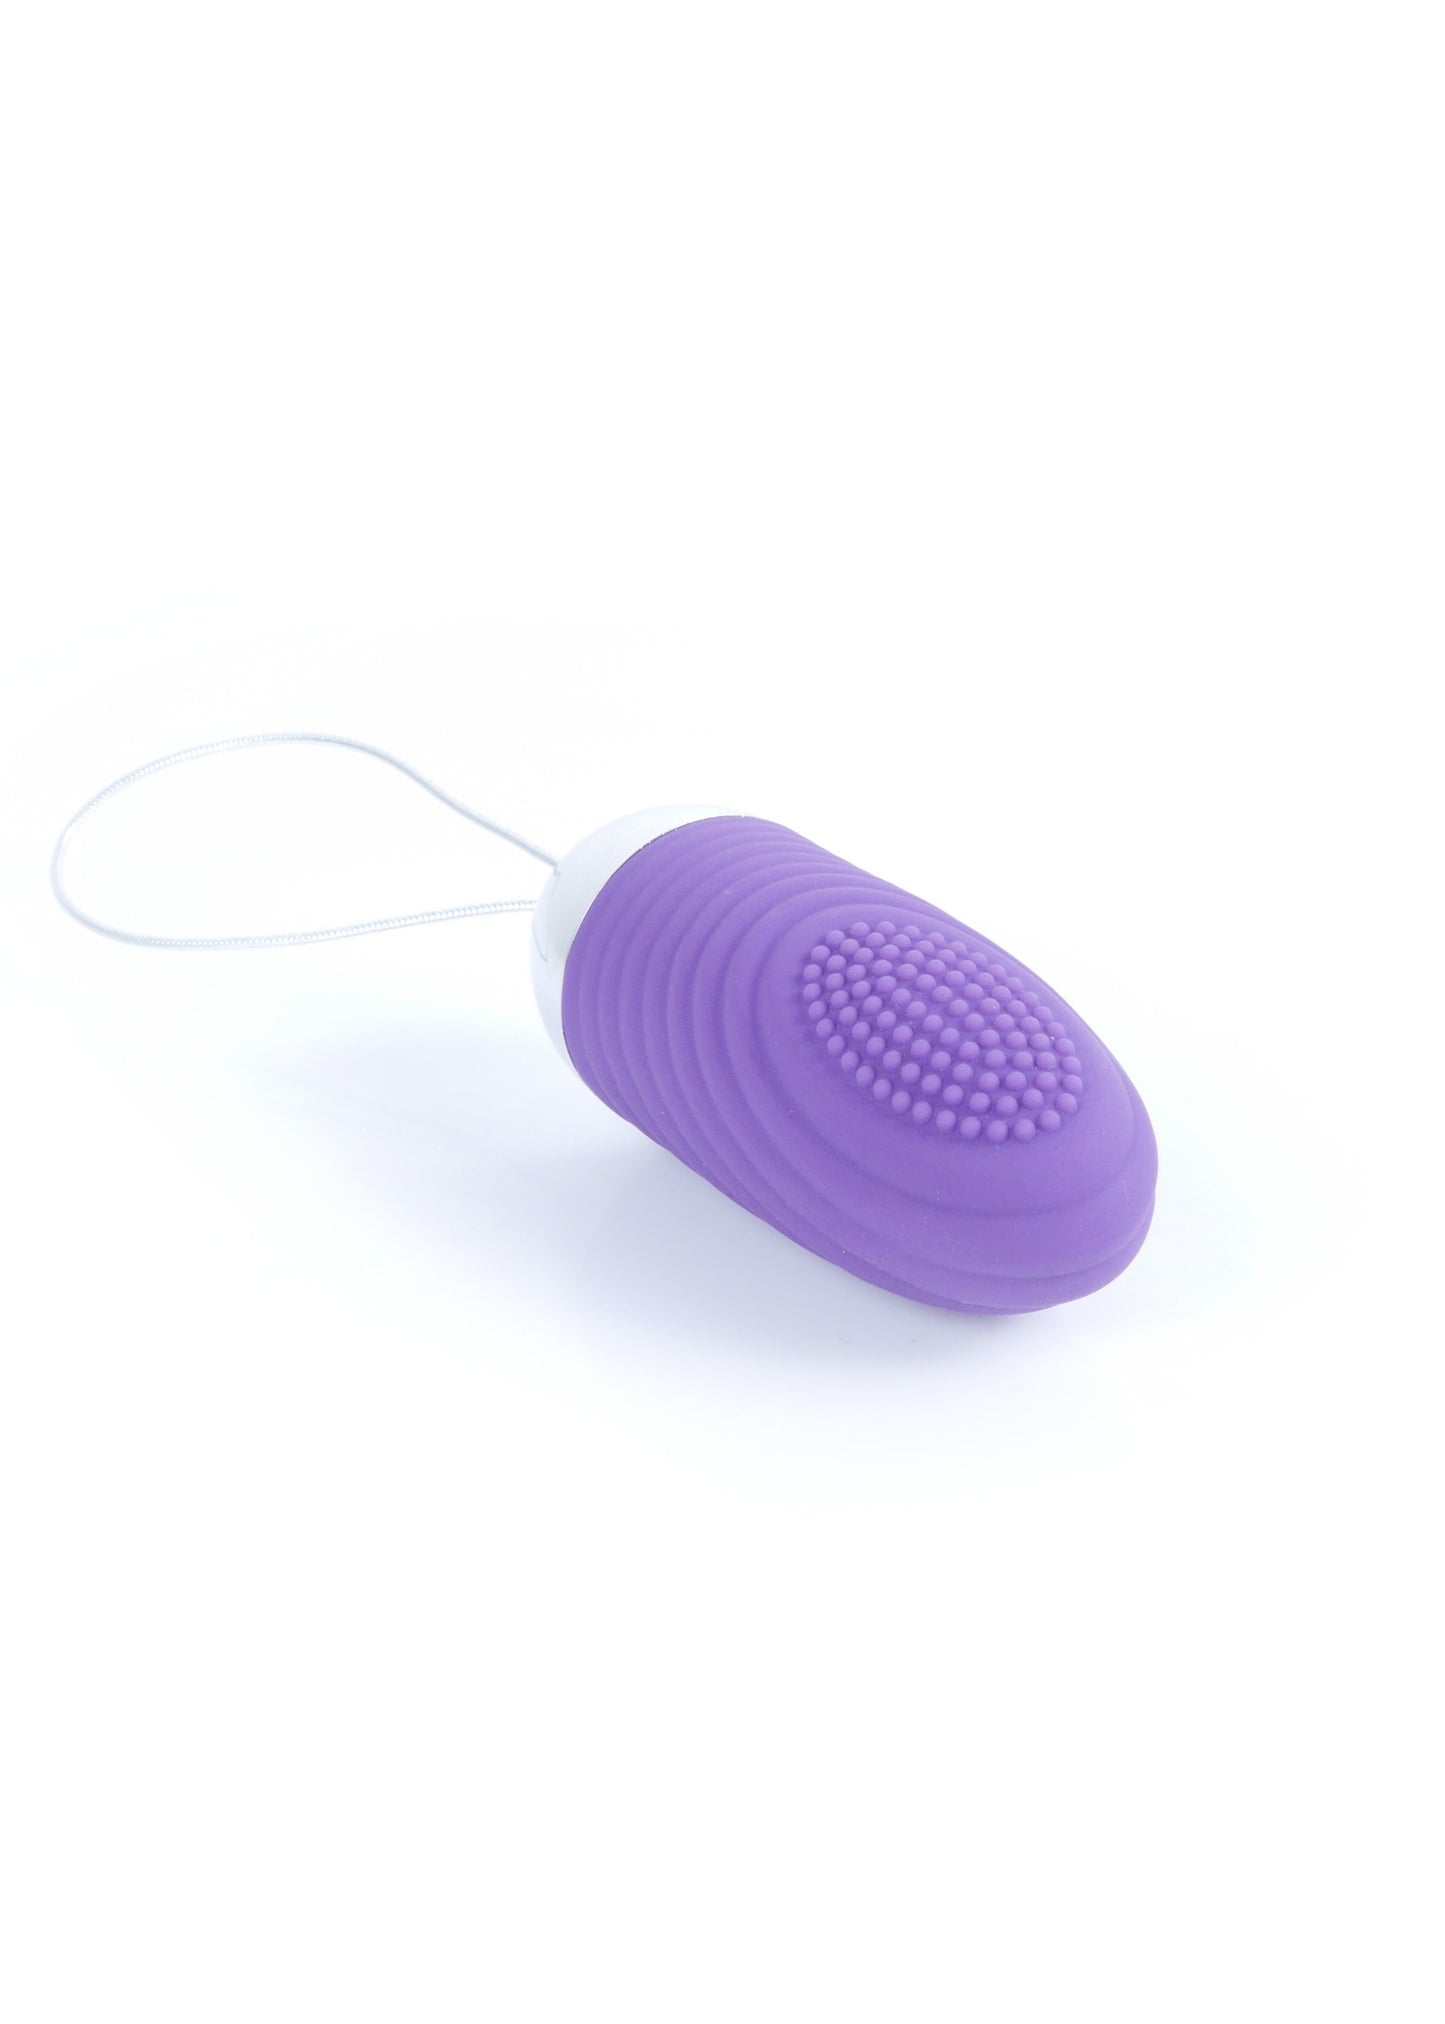 Bossoftoys - 26-00107 - Remoted controller egg - USB - Purple